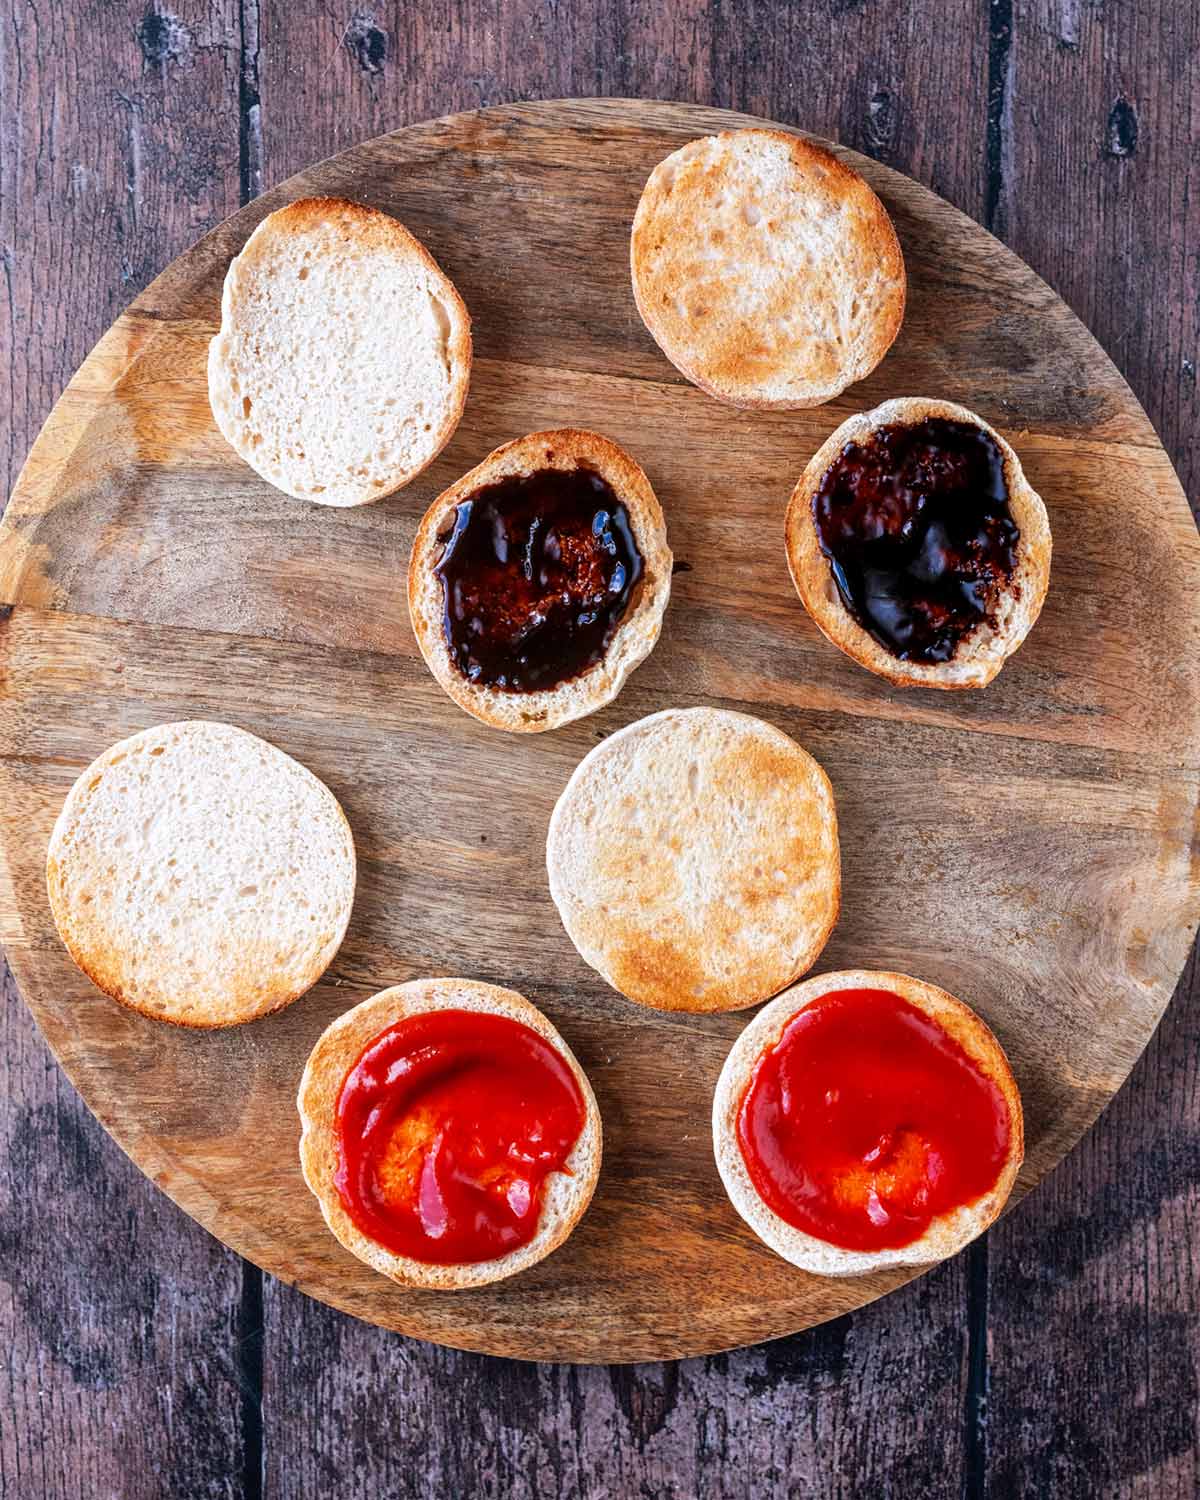 Eight toasted muffin halves, two with ketchup two with barbecue sauce.